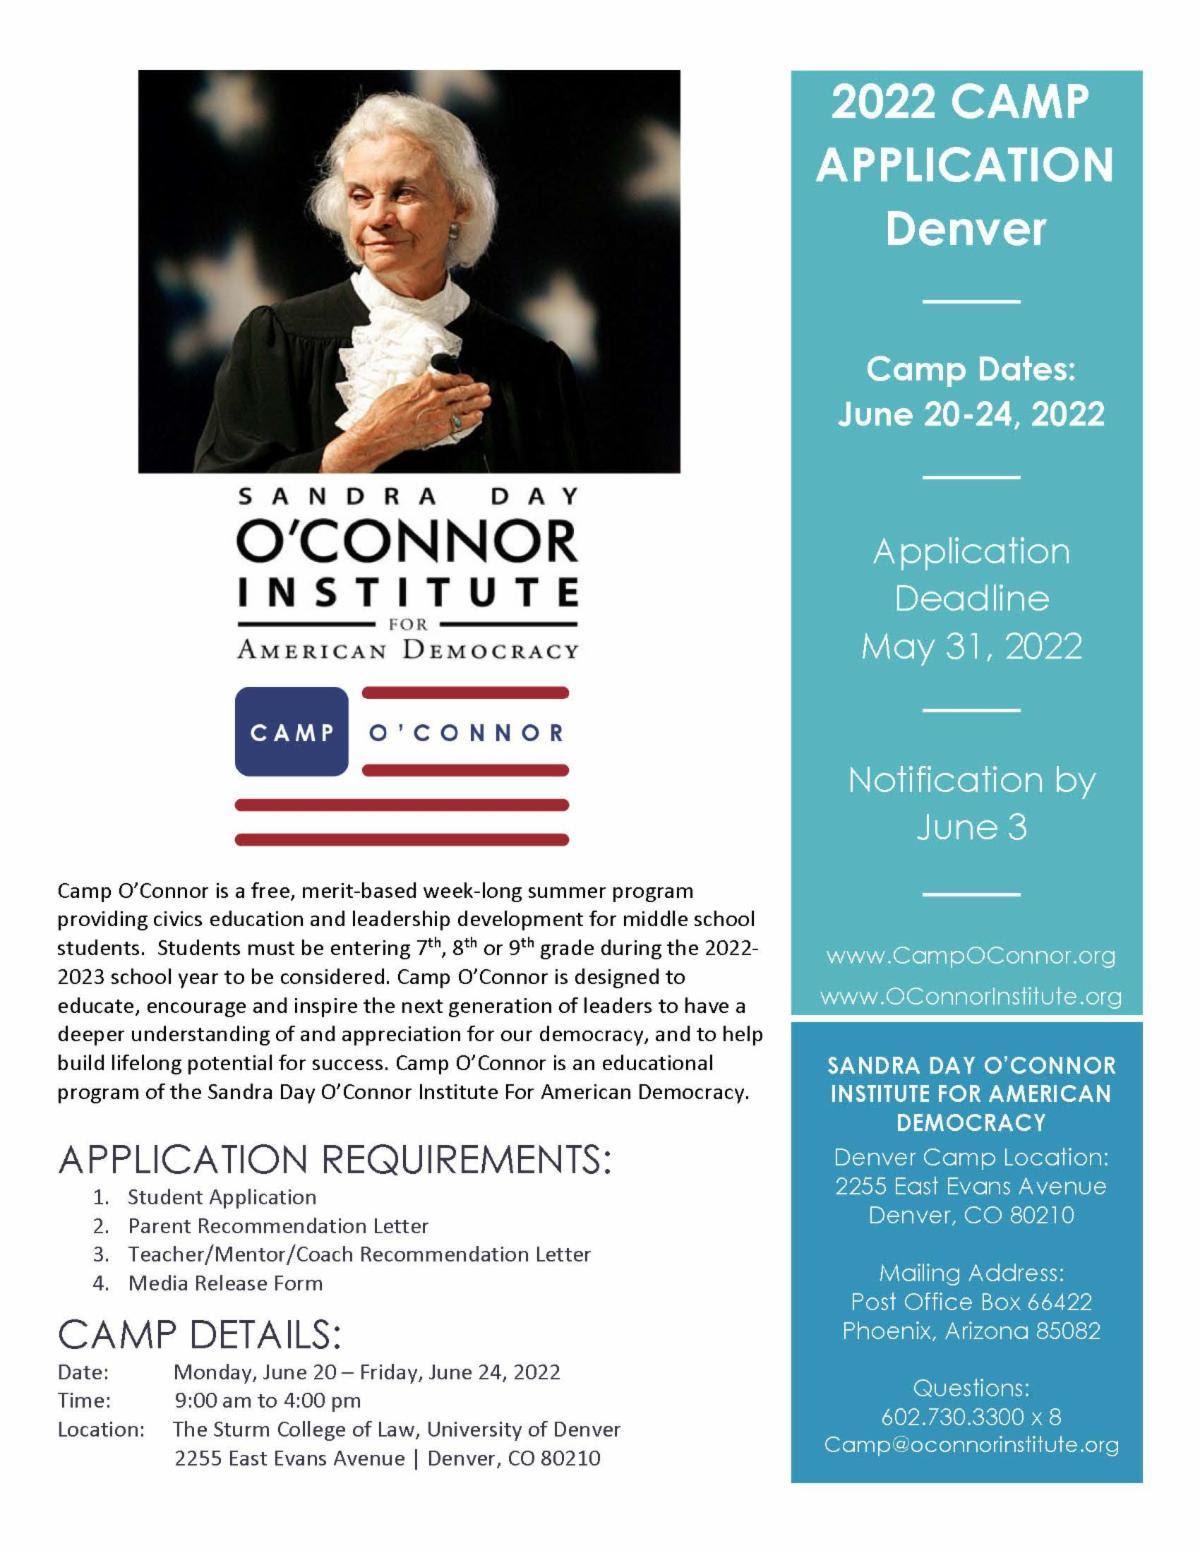 O' Conner Civics Camp for Middle school students